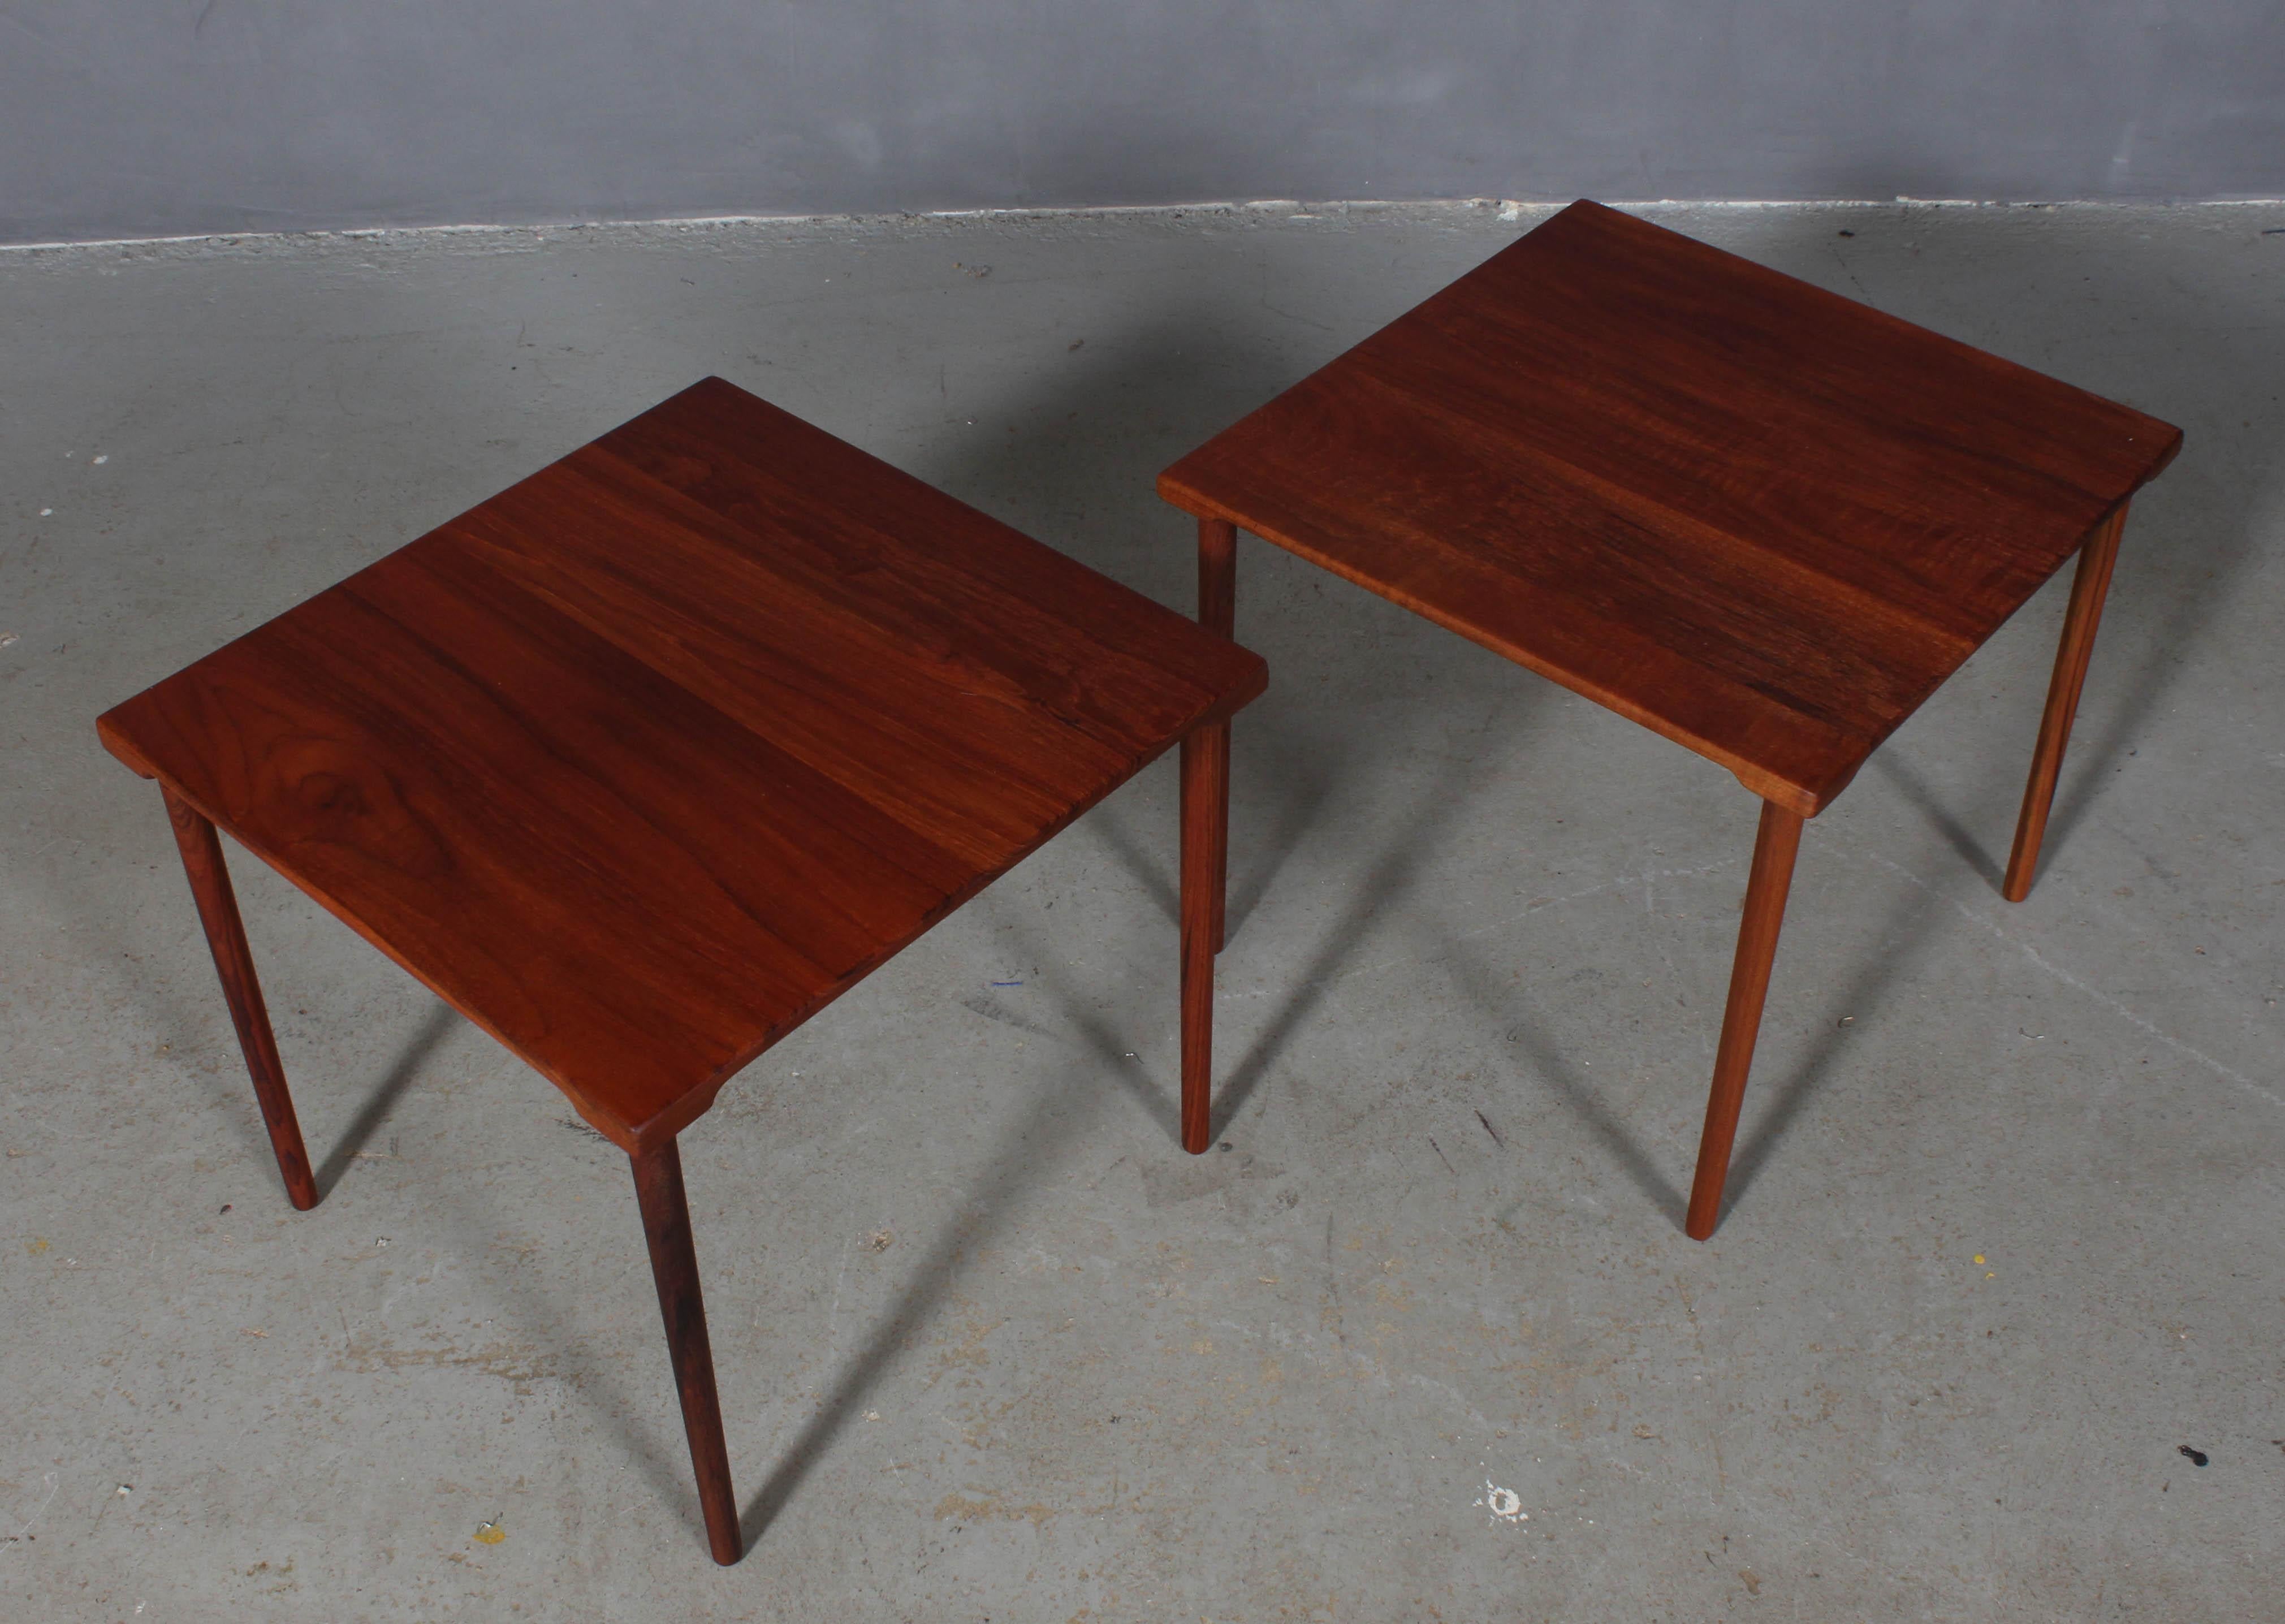 These lovely and Minimalist Danish modern teak side tables were designed by Peter Hvidt & Orla Mølgaard-Nielsen in the 1960s for France & Daverkosen / France & Son. Made entirely of solid teak, the top has gorgeous grain, and each side has an arced